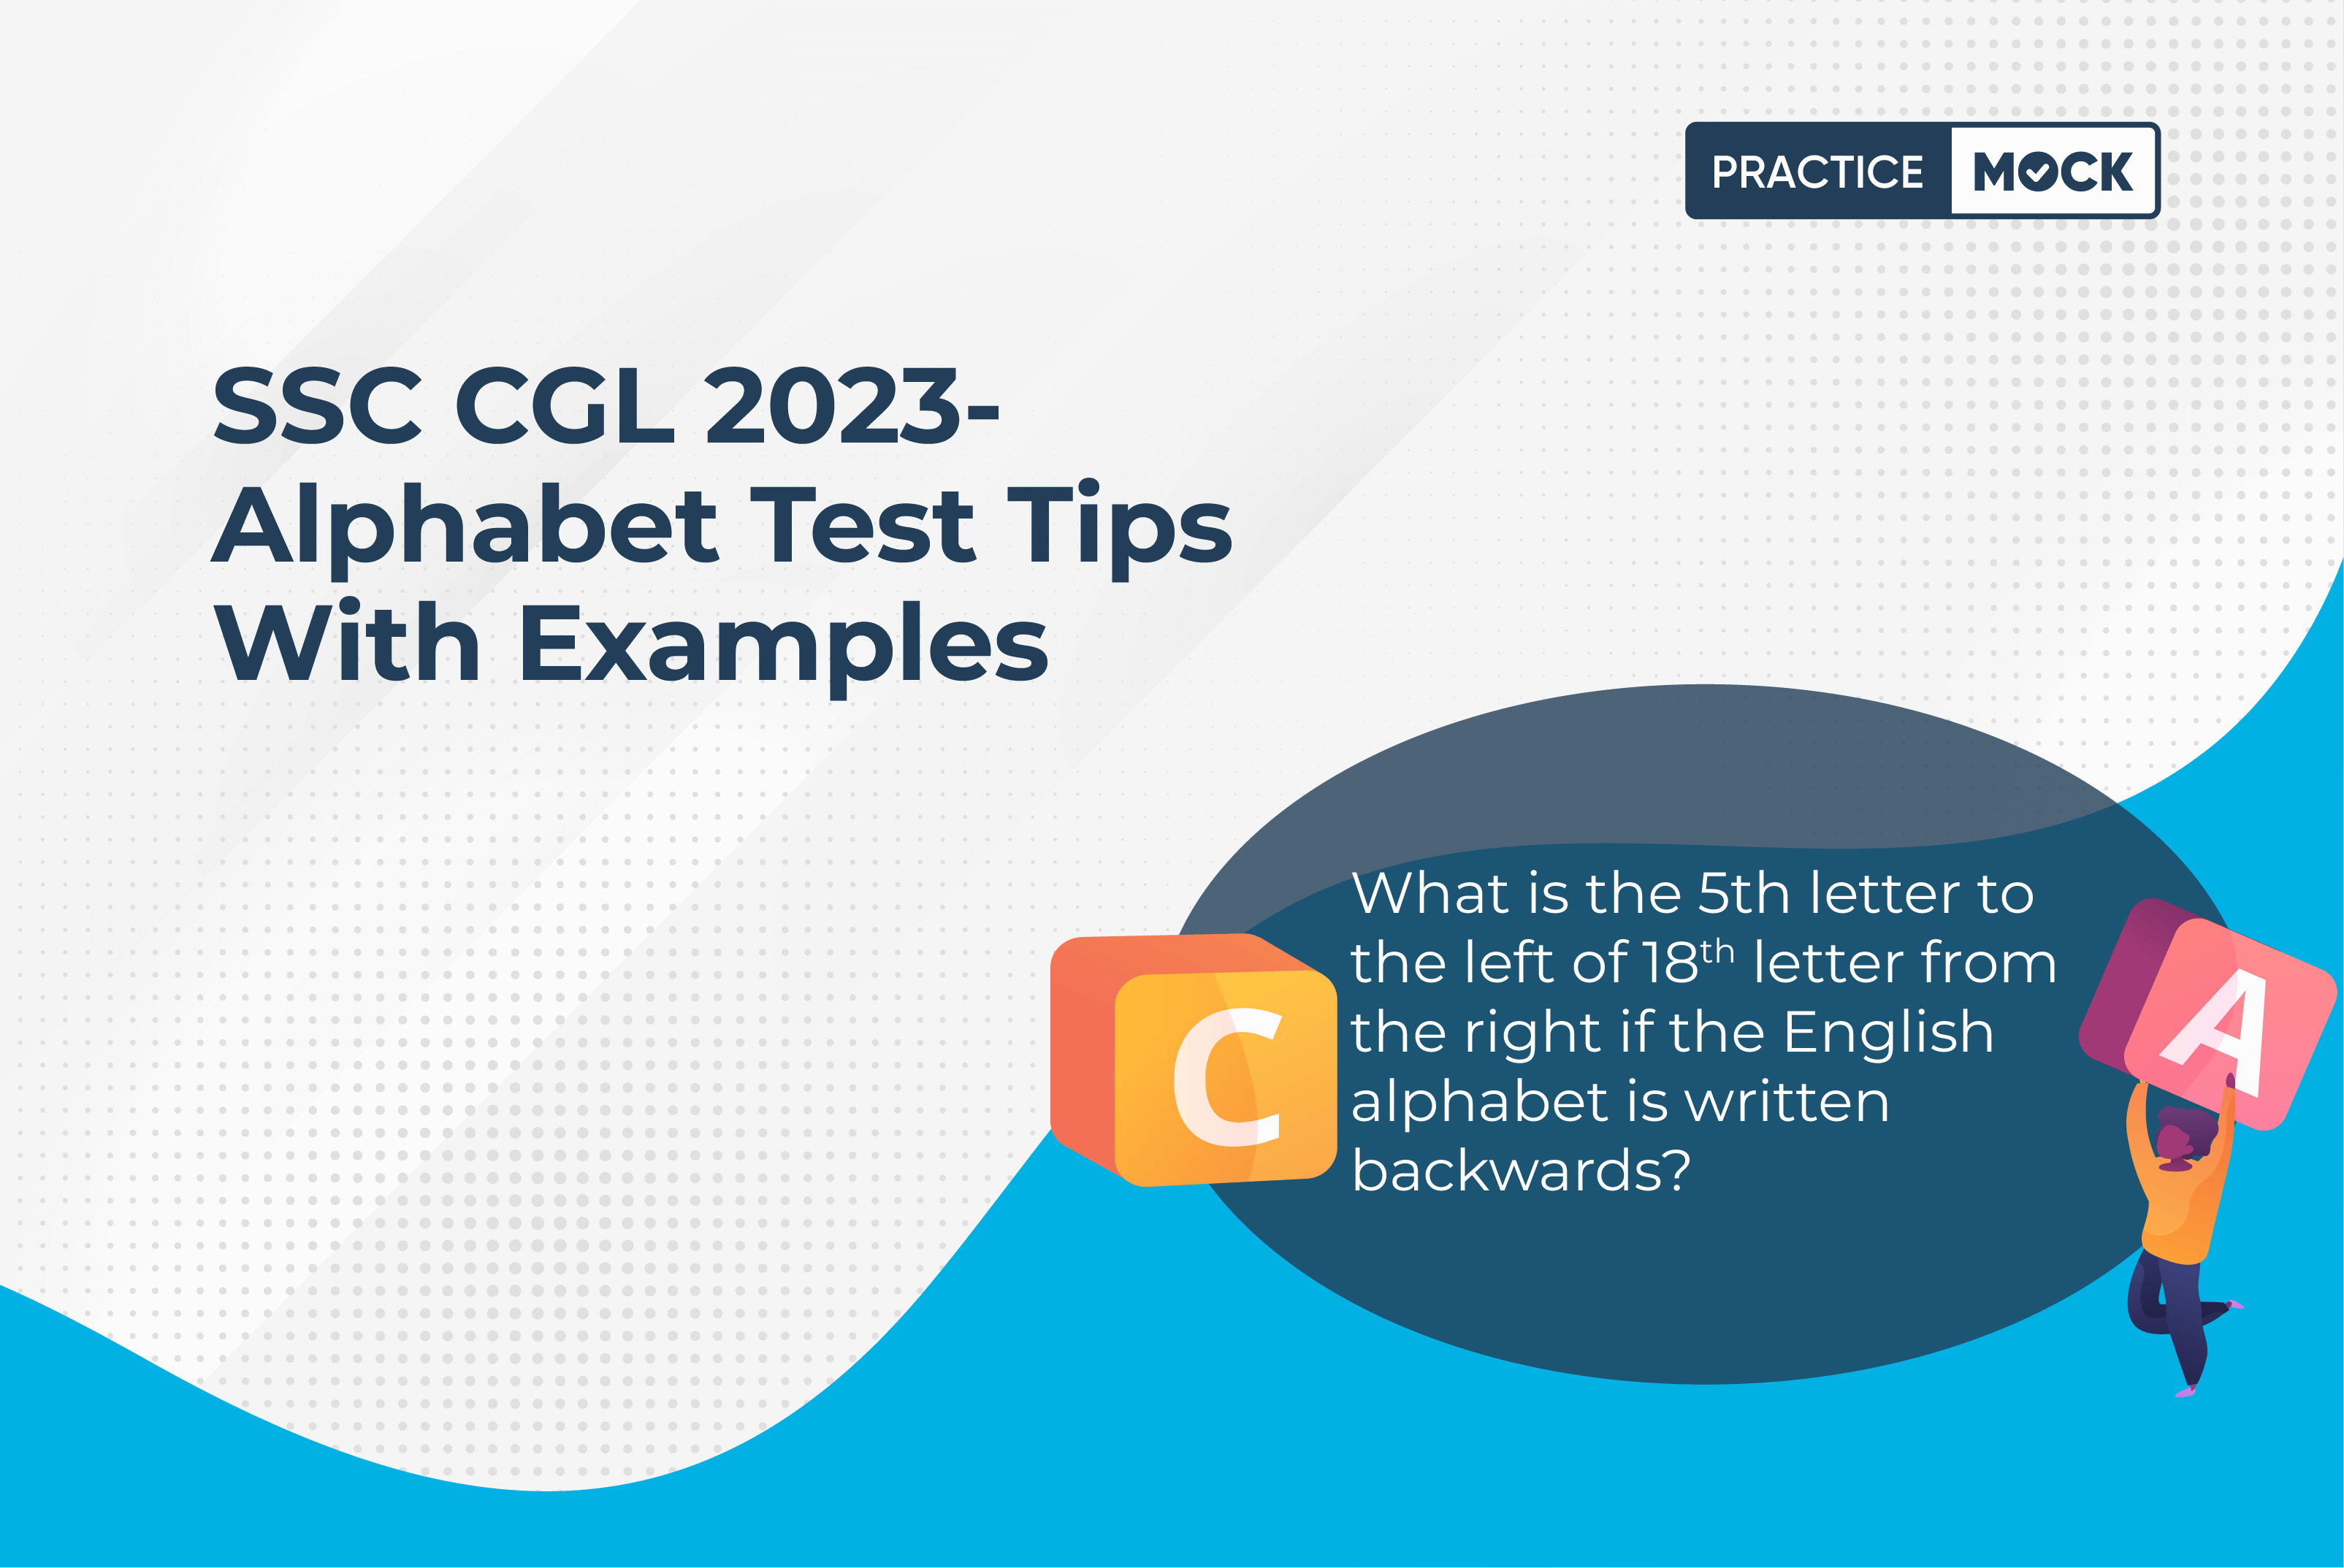 SSC CGL 2023- Alphabet Test Tips with Examples